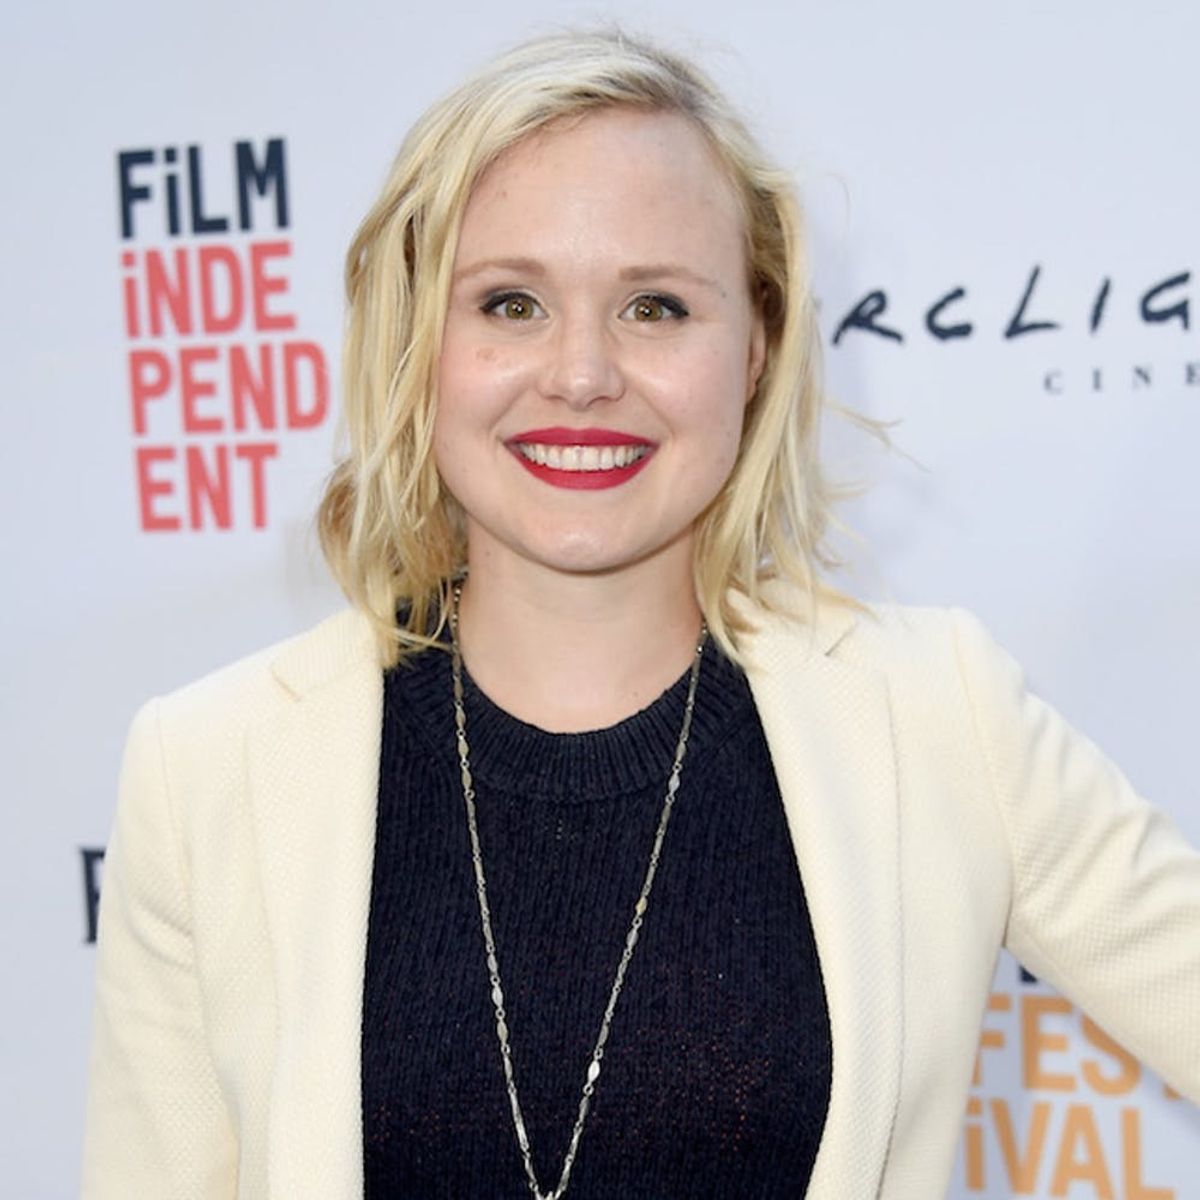 Morning Buzz! Alison Pill Announces She’s Having a Baby With Adorable Sonogram Pic